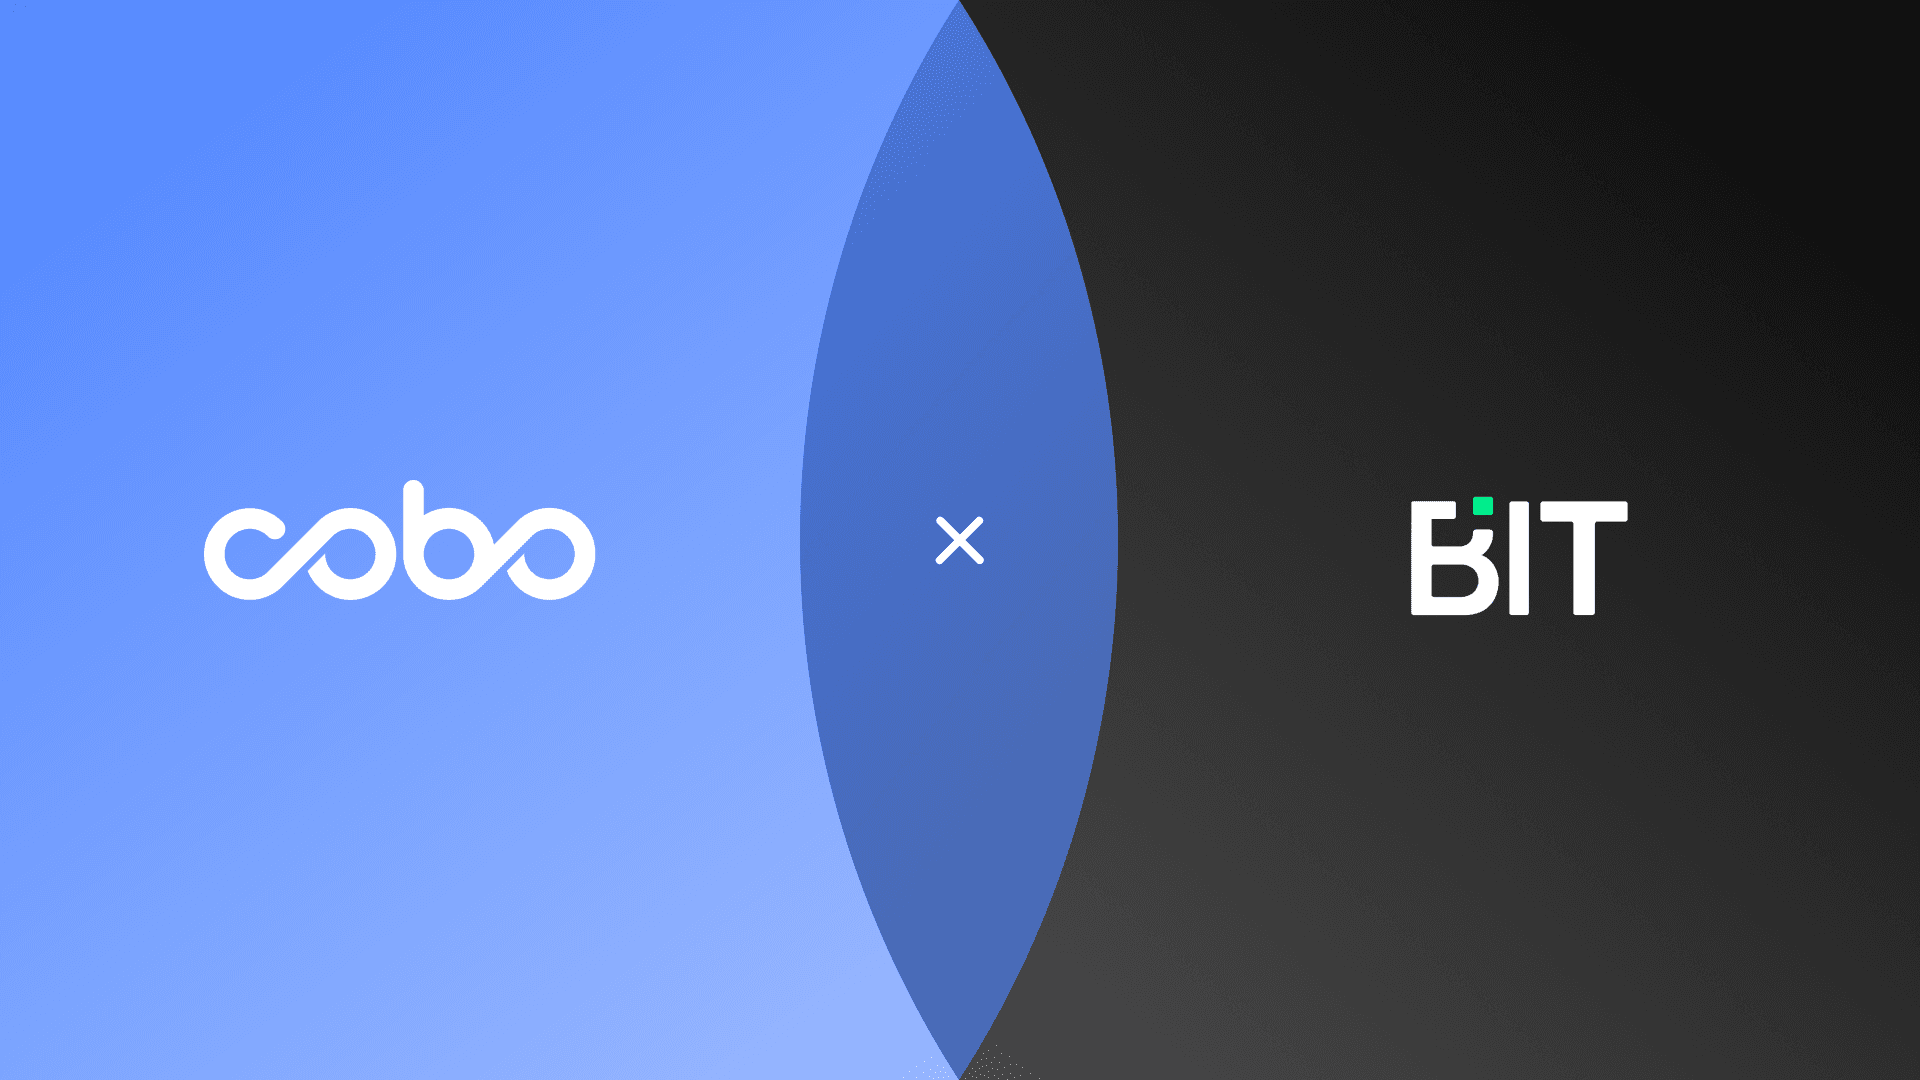 BIT Crypto Exchange Partners with Cobo Wallet-as-a-Service for BRC20 Token Trading Zone